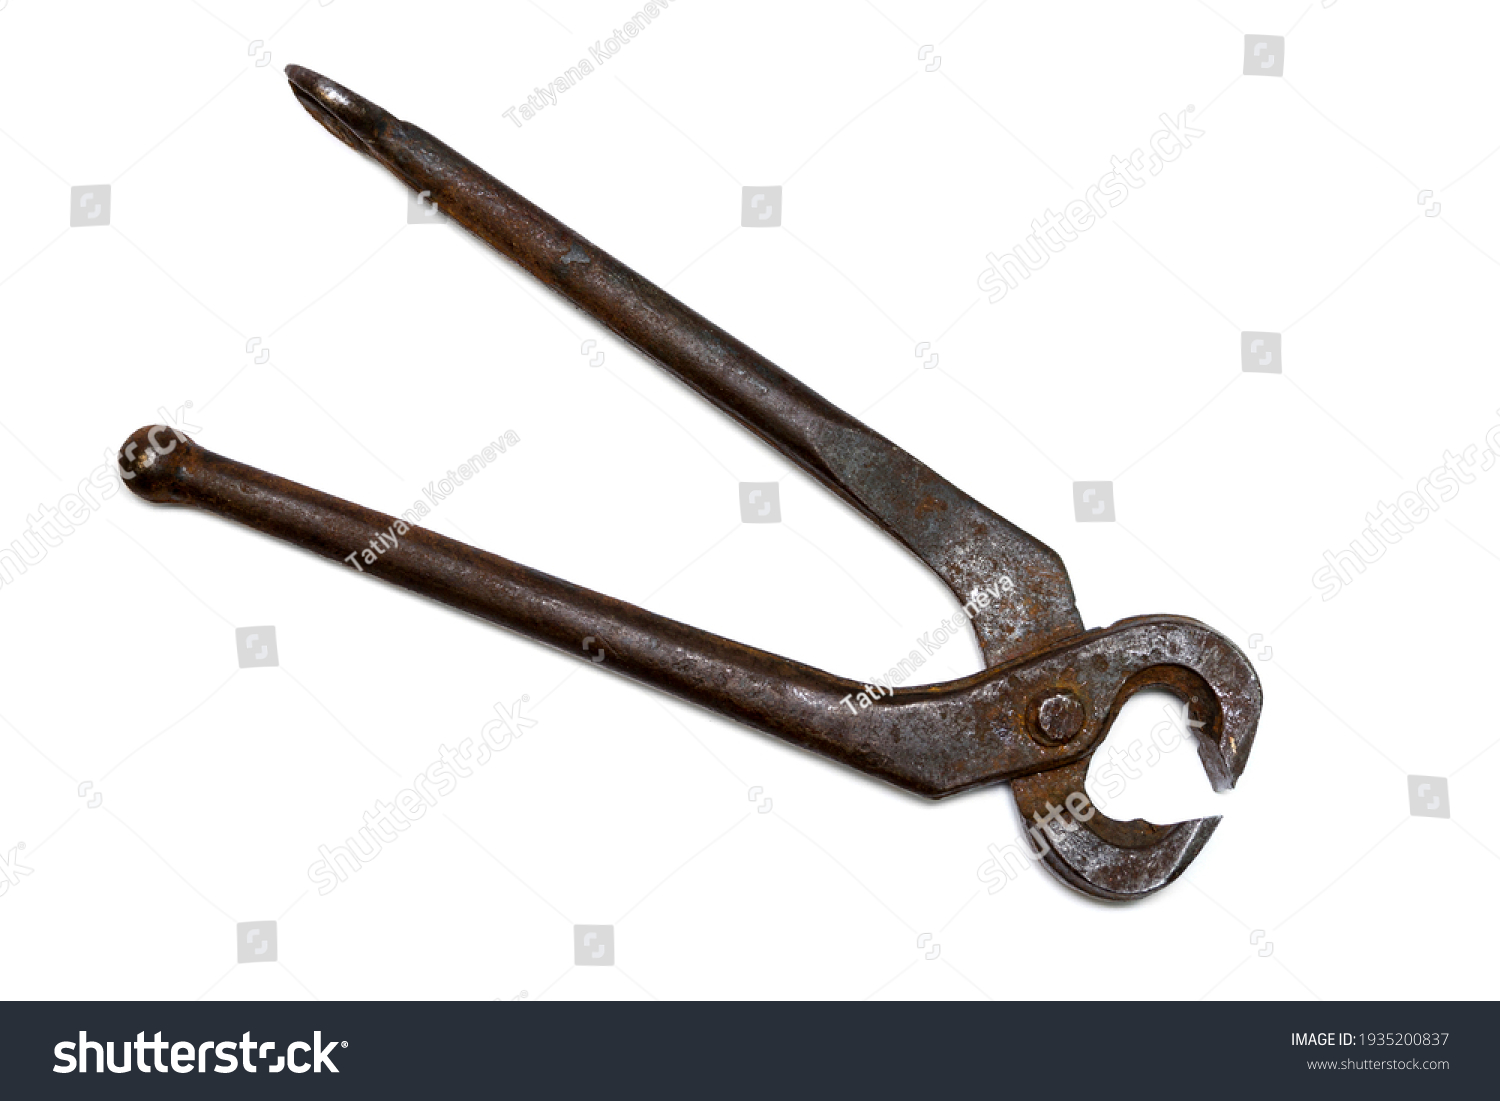 Old rusty pincer pliers isolated on white background. #1935200837